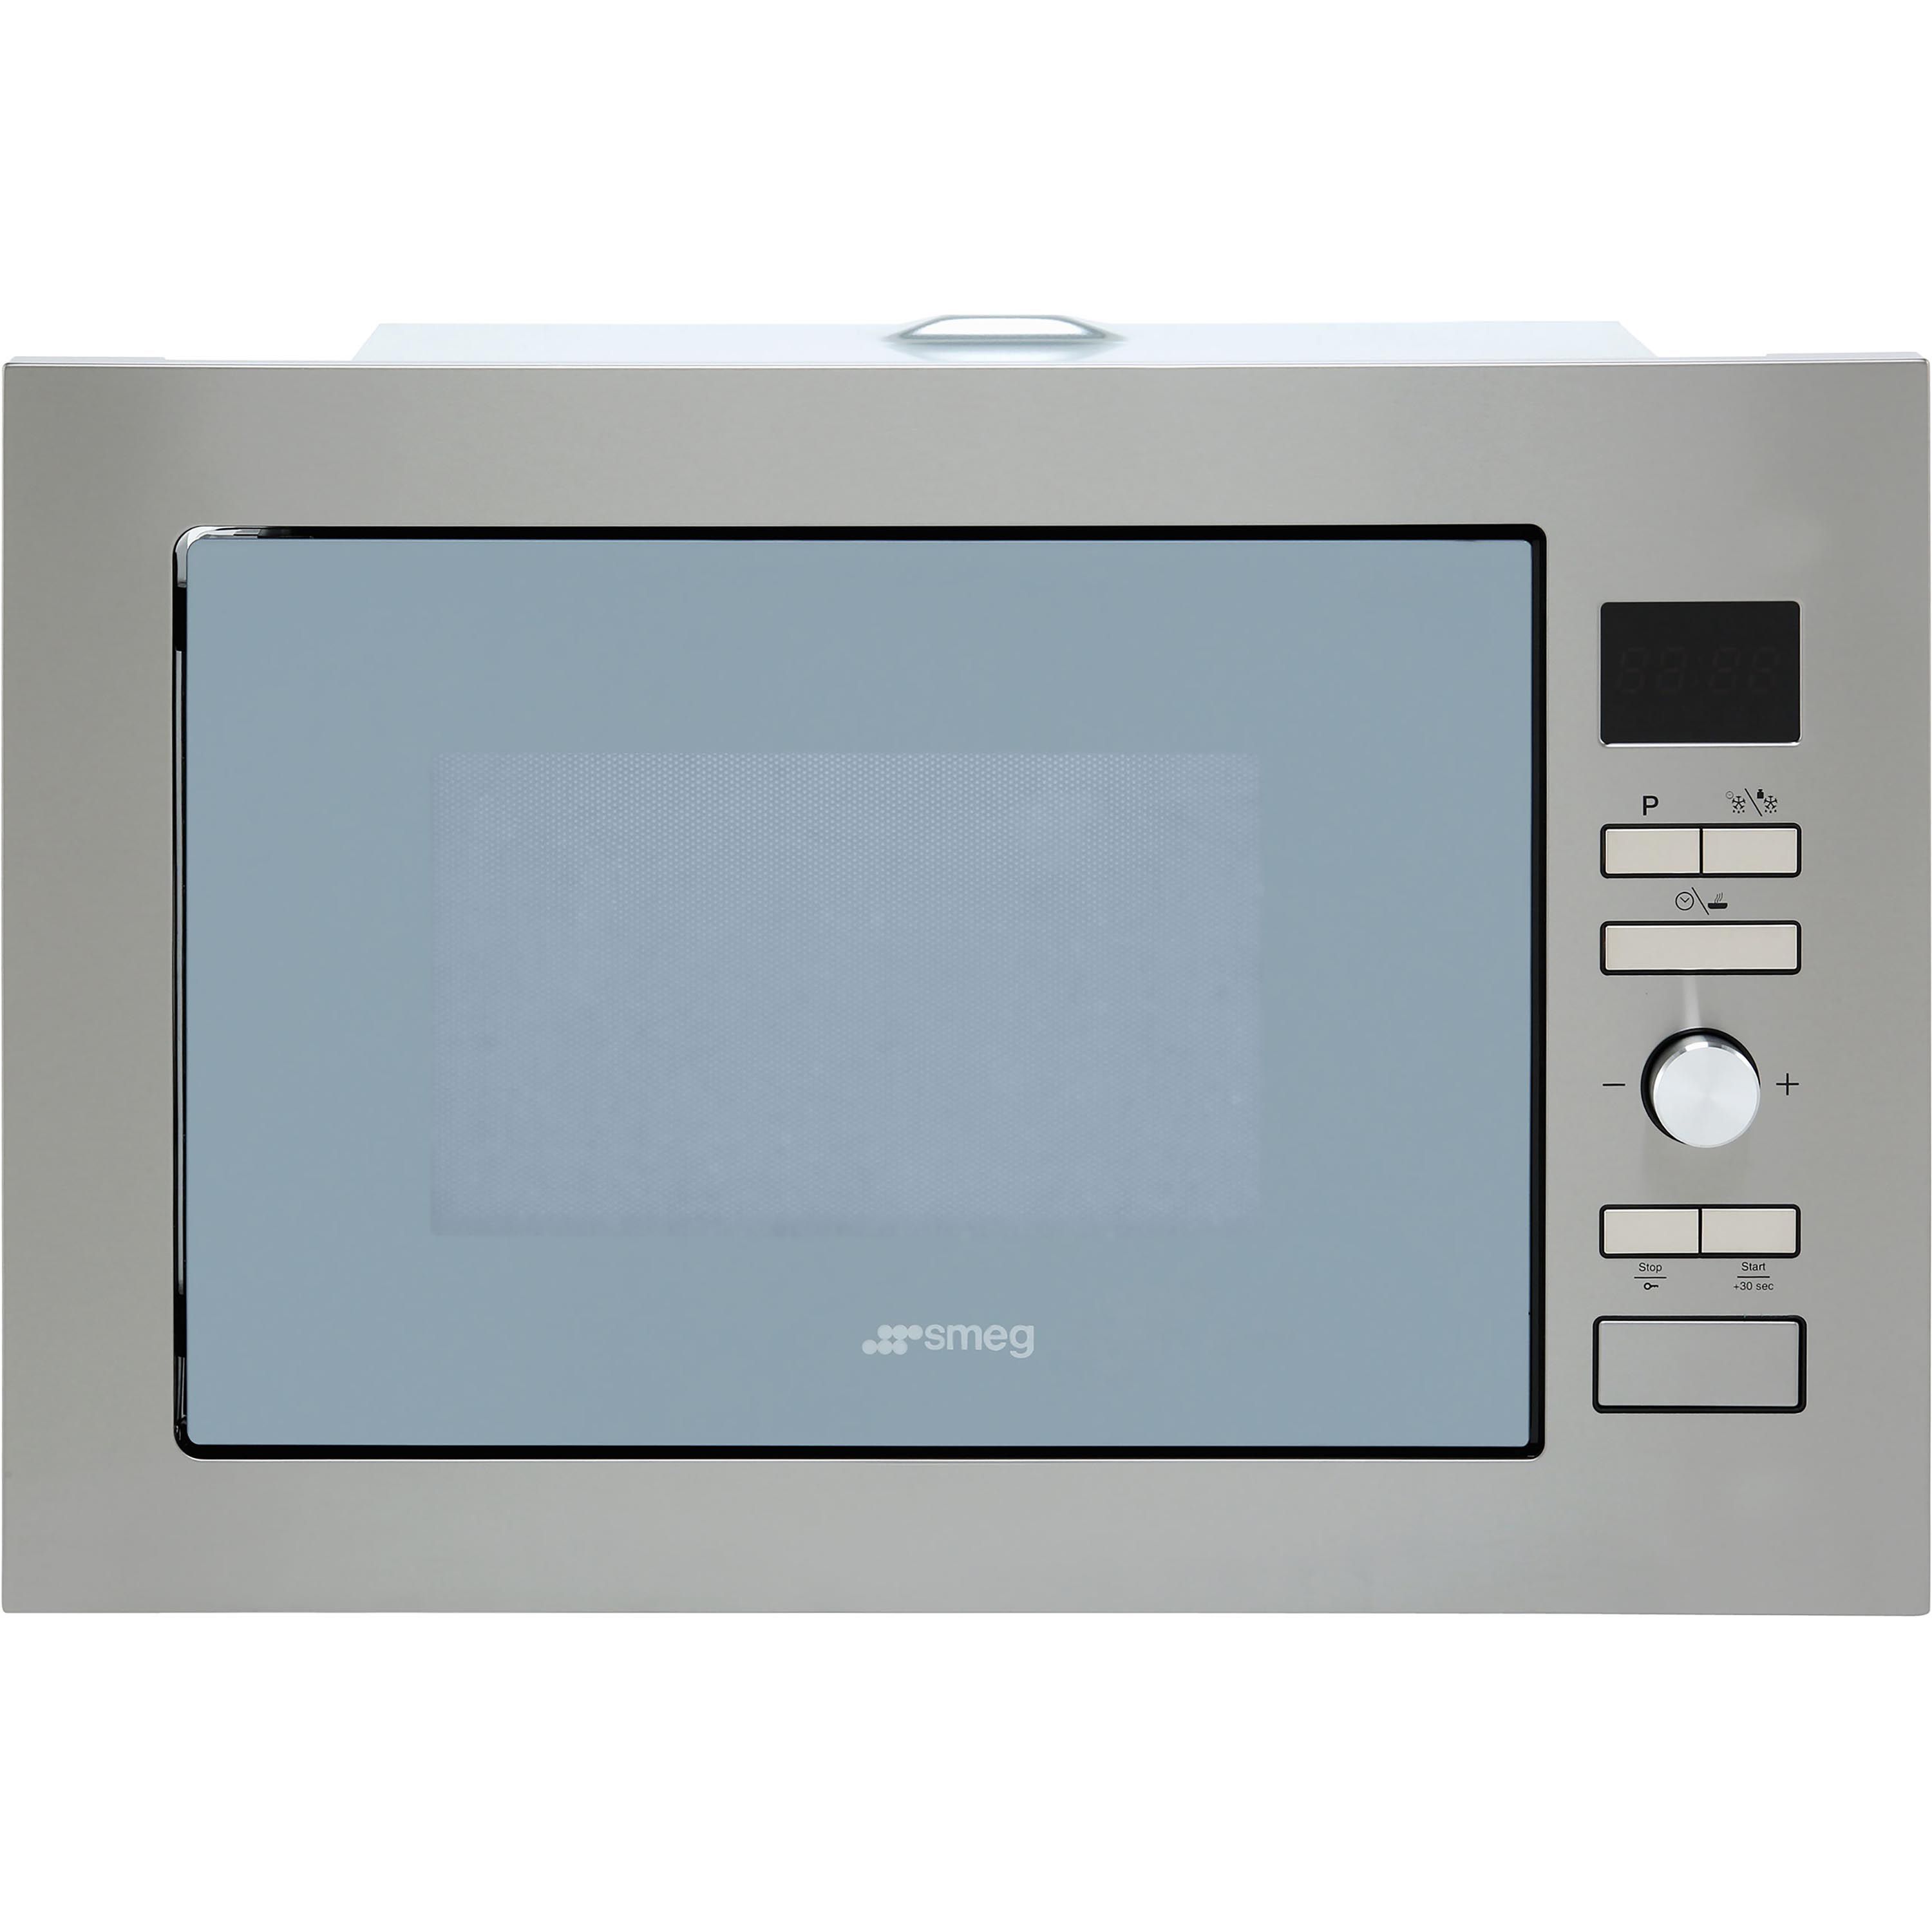 Smeg FMI425S_SG Built-in Microwave with grill - Stainless steel